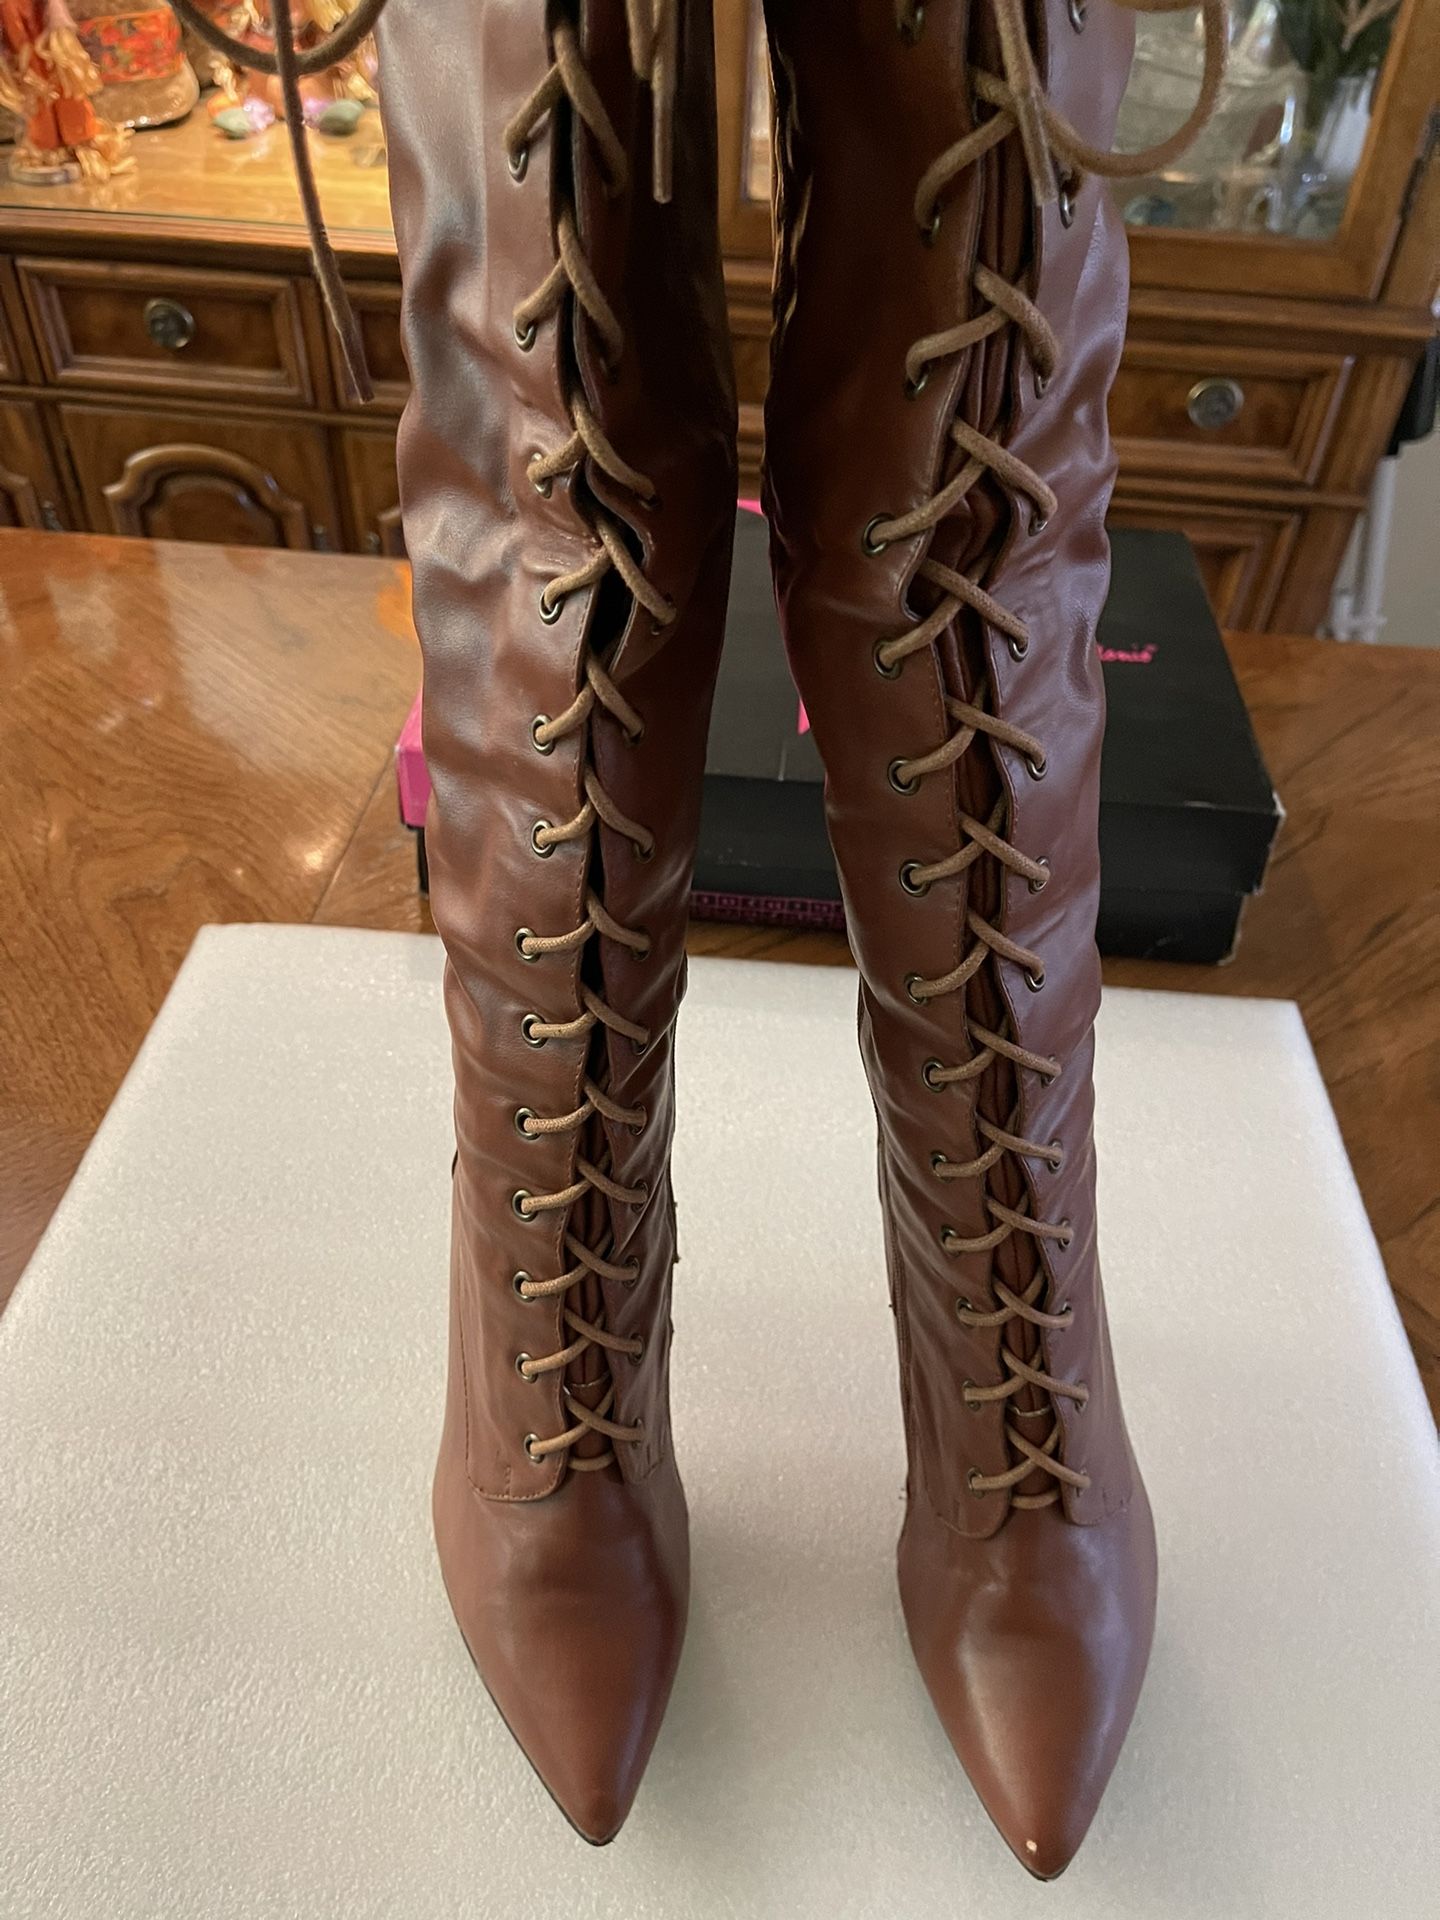 Michael Antonio Kiev Thigh High Boots in Excellent Condition  - Material: PU, Color:  Cognac, Size: 8.5